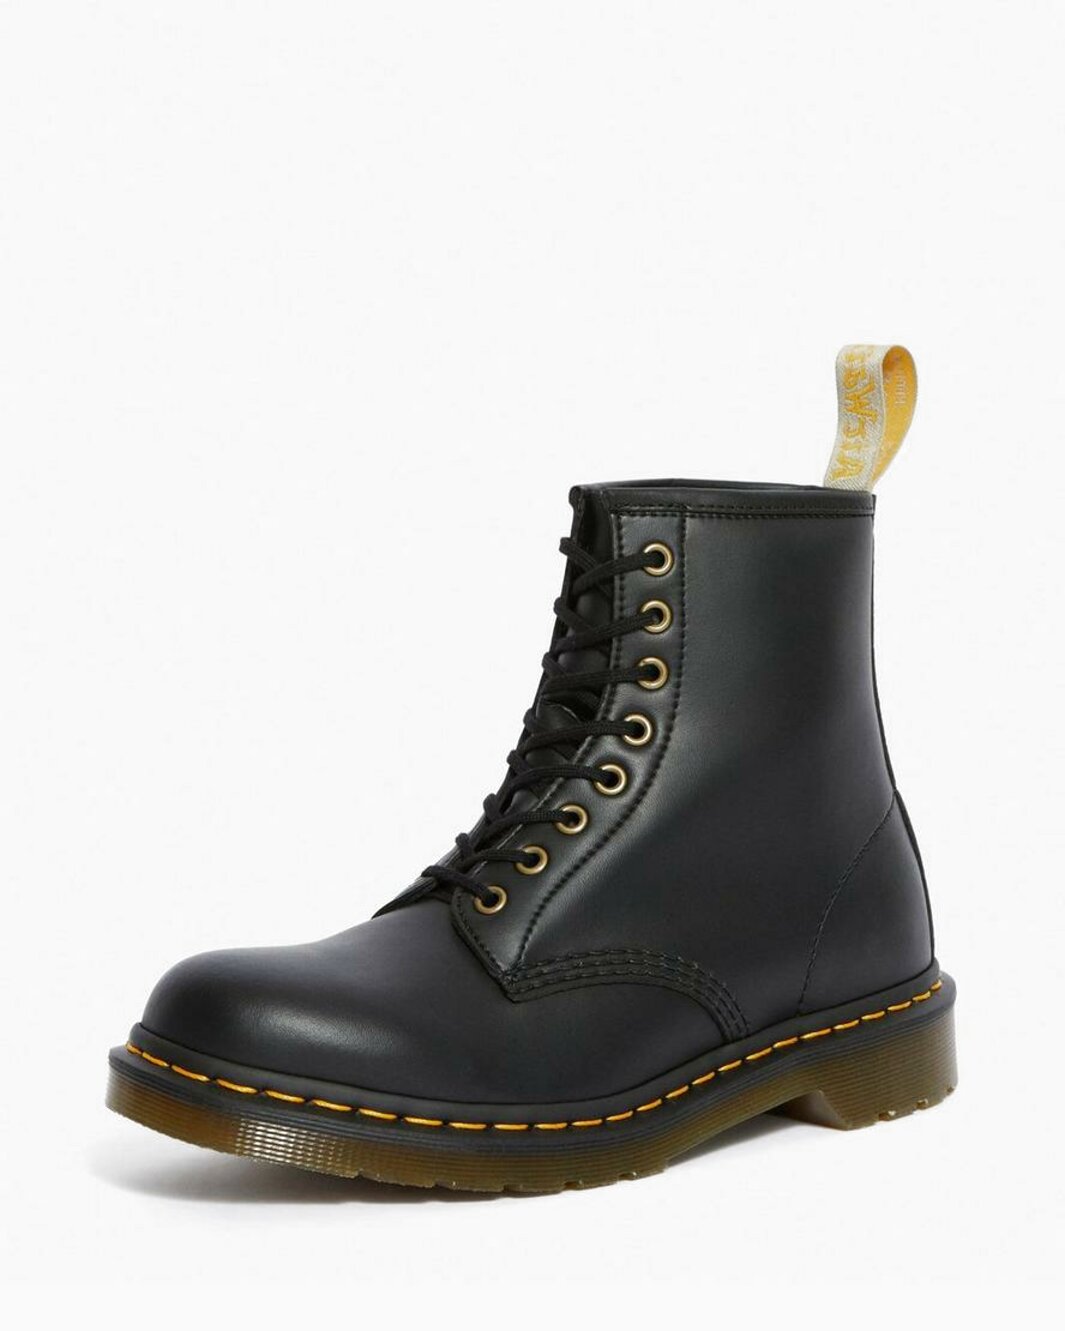 second hand doc martens size 7